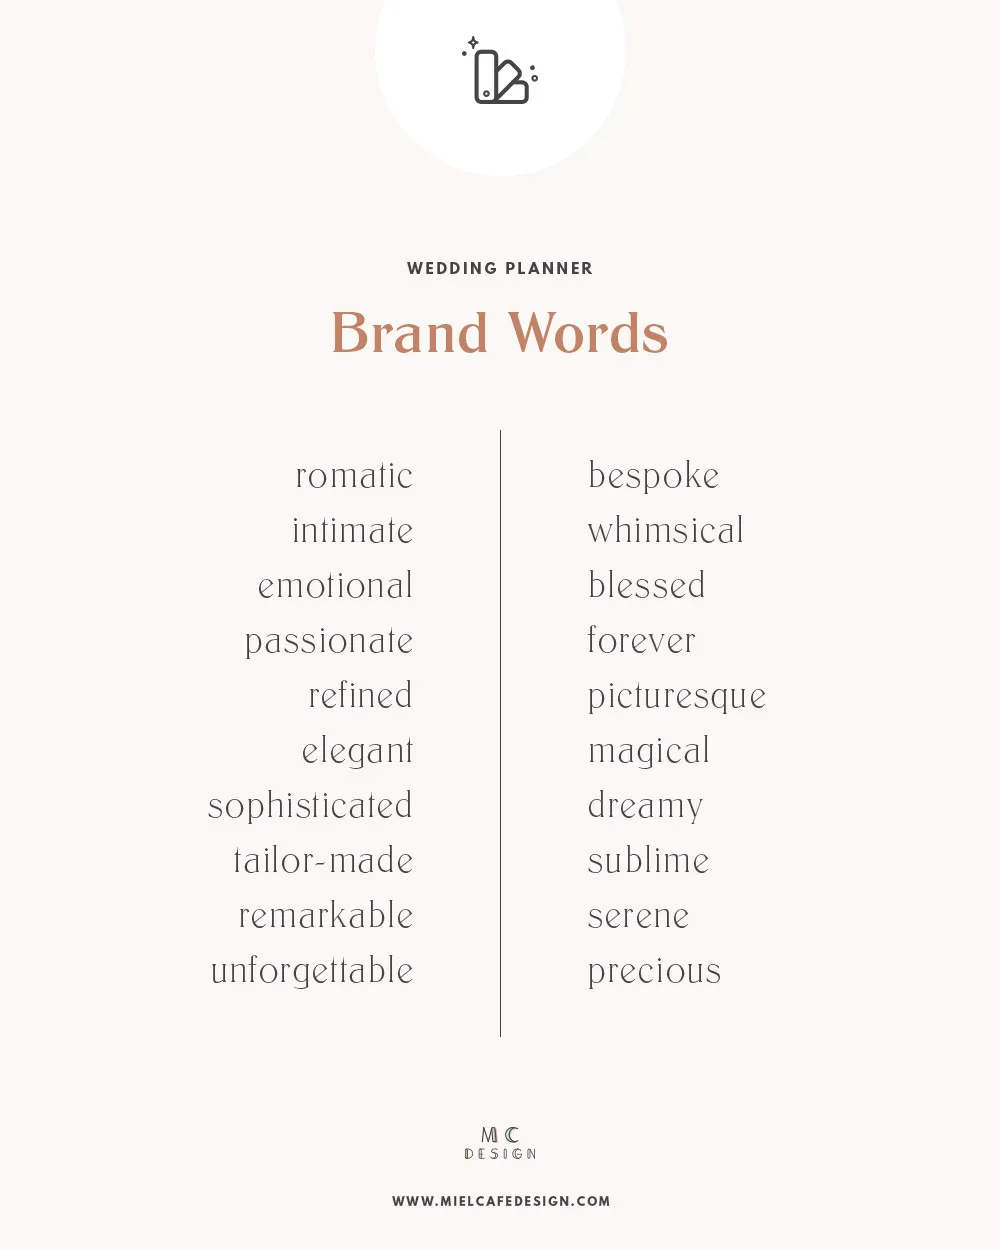 How to create your wedding planner brand: a selection of appropriate brand words for wedding planner brands